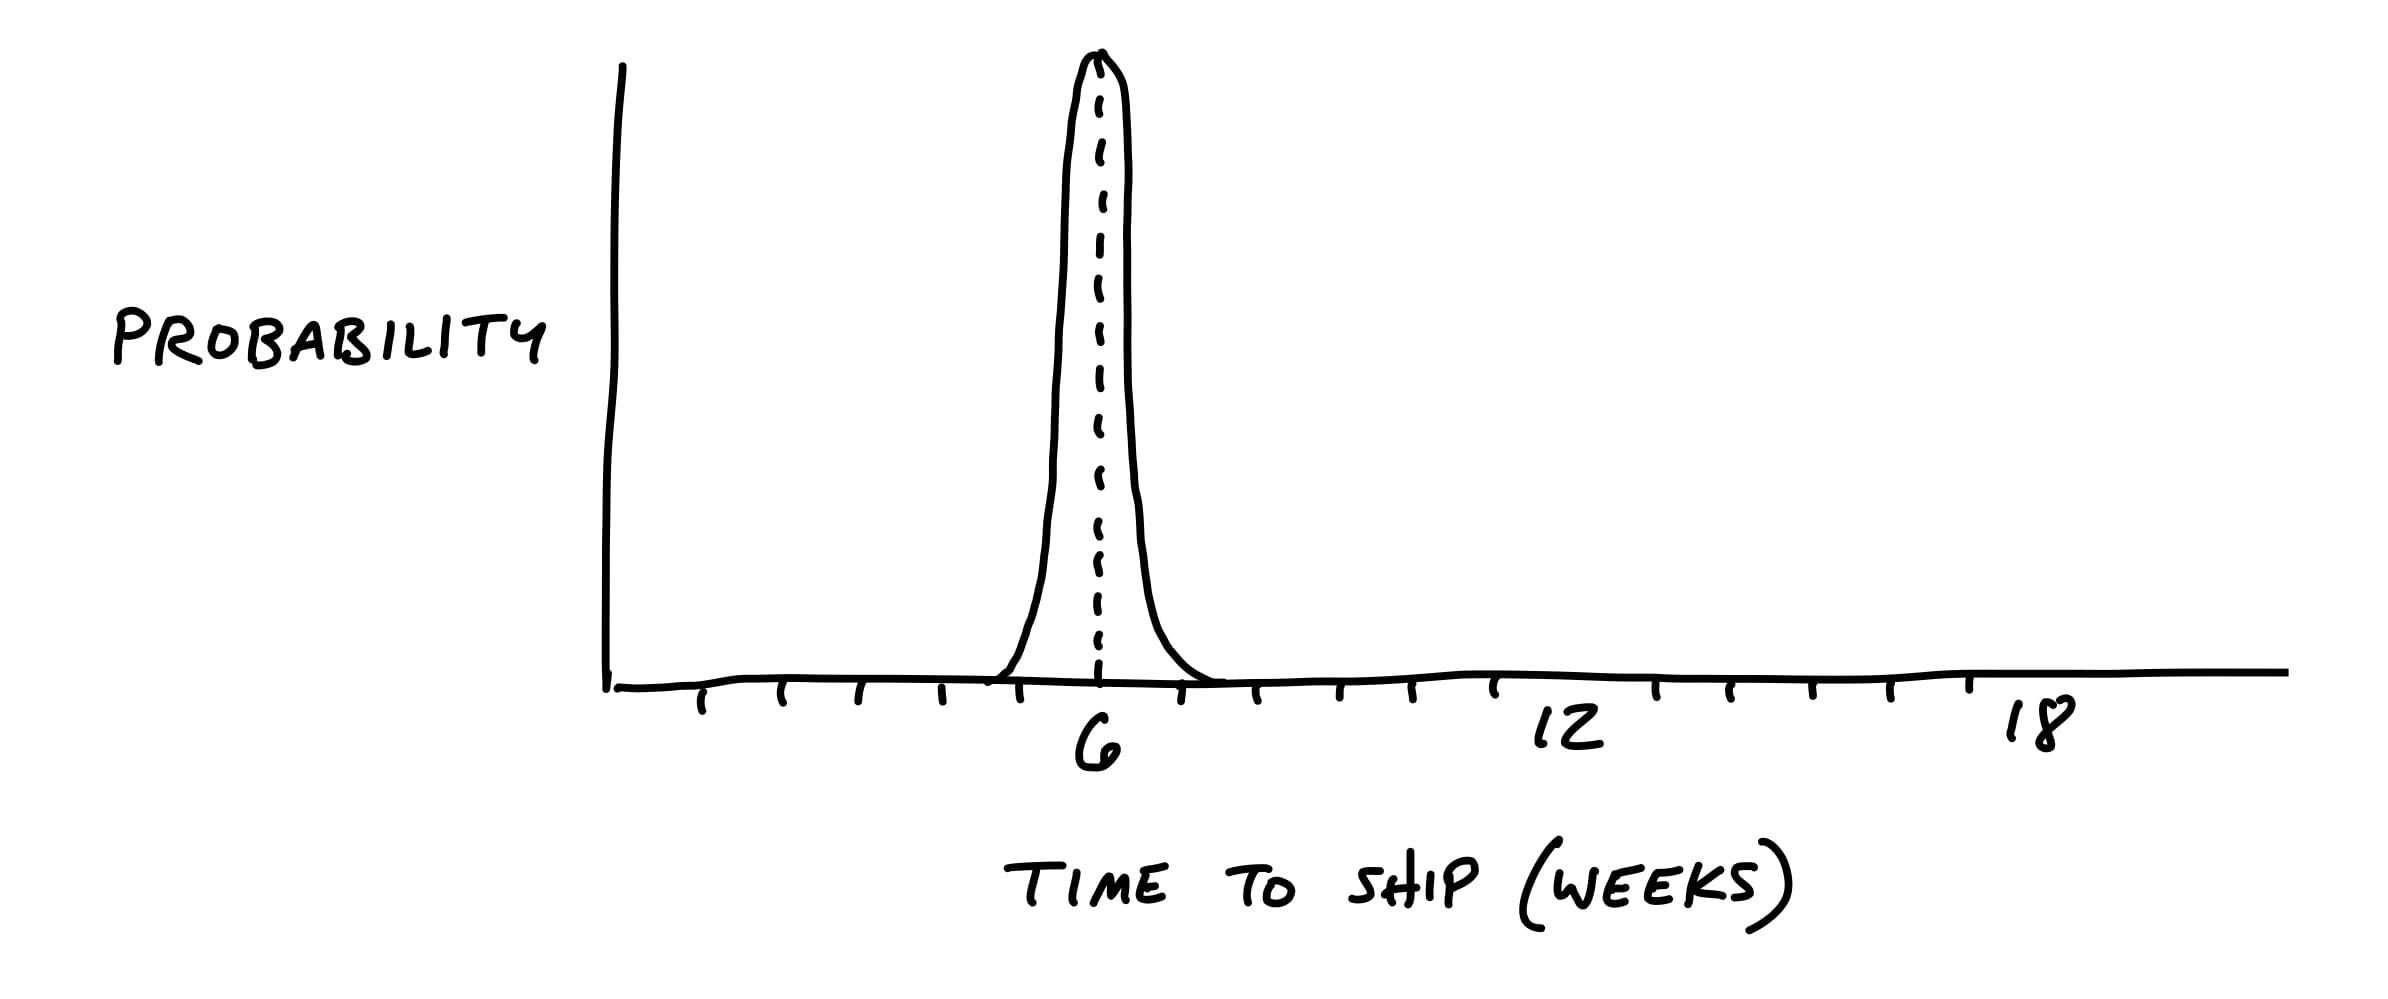 Drawing of a thin tailed probability distribution. The Y axis is probability and the X axis is Time to Ship in Weeks. The X axis extends from zero weeks to 18 weeks. There is a single spike at 6 weeks shaped like a normal distribution, extending slightly to the left and right at the bottom of the curve. The left edge only extends to five weeks and the right edge to seven weeks.